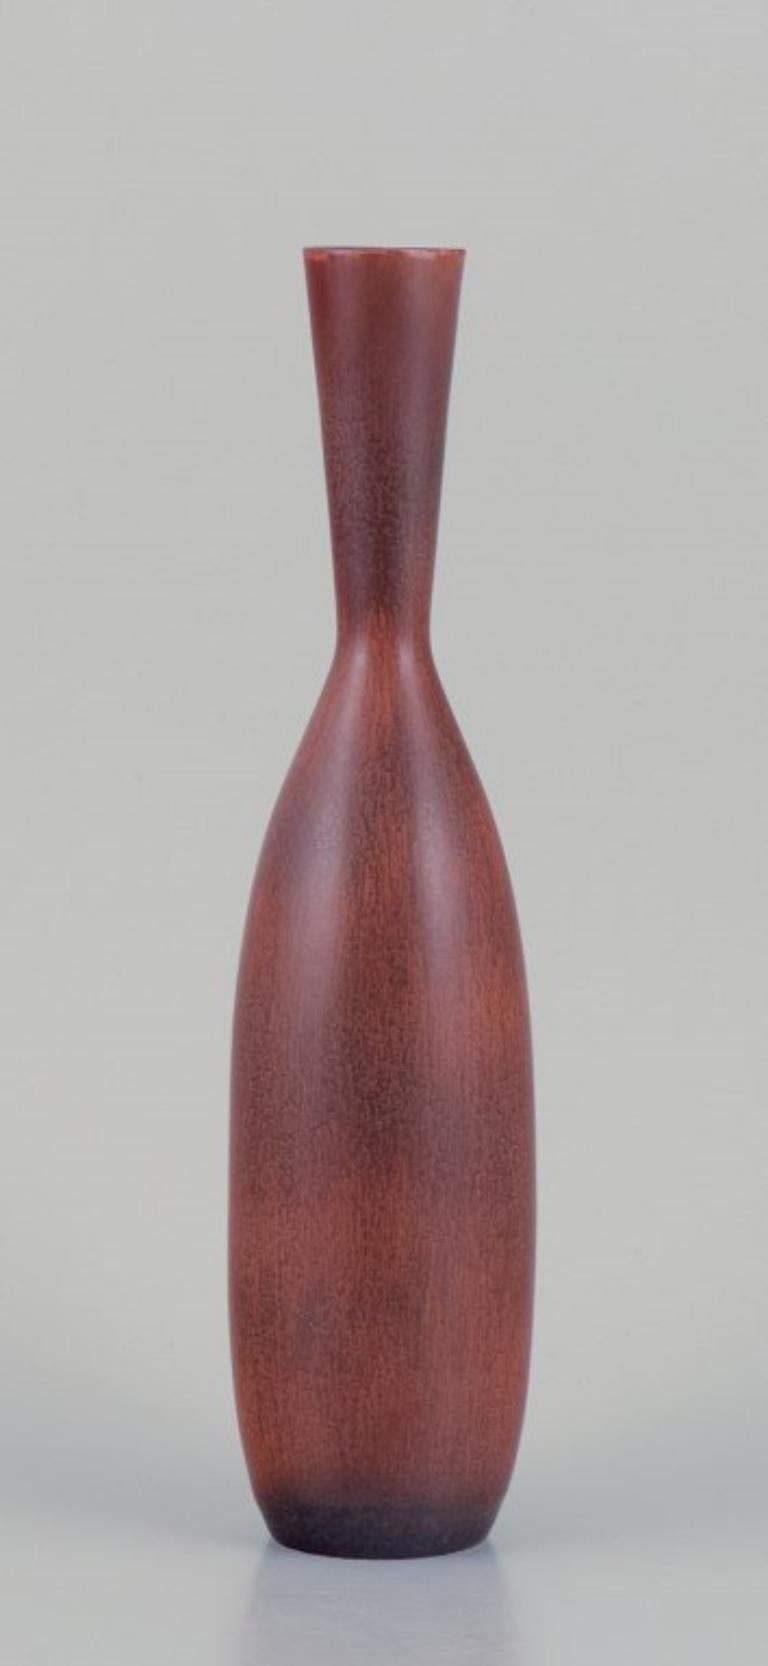 Carl Harry Stålhane (1920-1990) for Rörstrand. 
Large ceramic vase with a slender neck. Glaze in brownish tones.
Mid-20th century.
Marked.
In perfect condition.
Second factory quality.
Dimensions: Height 28.3 cm x Diameter 6.2 cm.

Carl-Harry